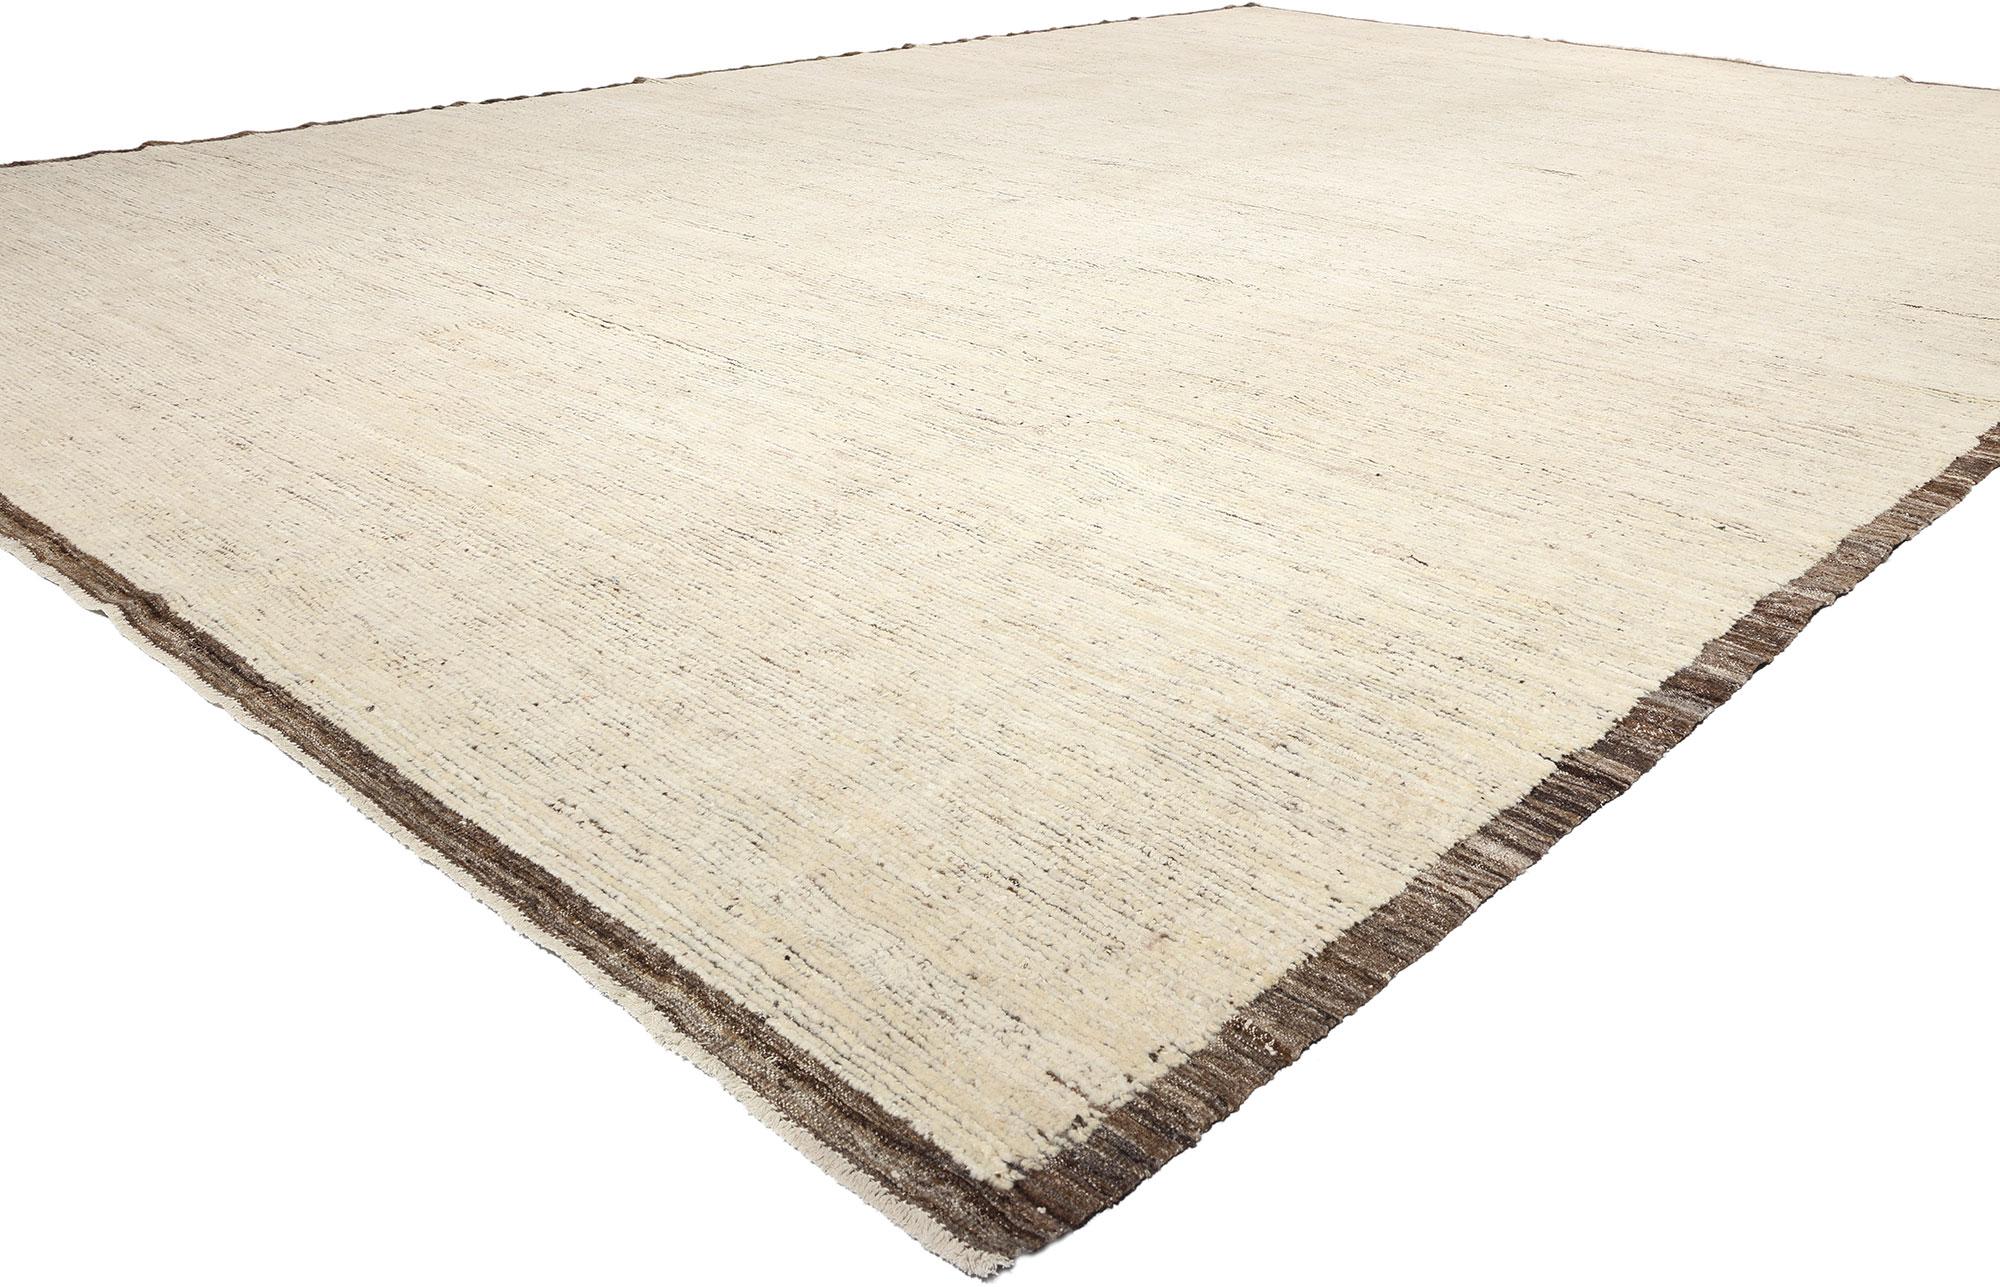 81108 Oversized Organic Modern Moroccan Rug, 14'02 x 20'03. Enter a realm of timeless sophistication with our meticulously hand-knotted wool oversized Moroccan rug, a true masterpiece that seamlessly blends the enduring allure of Biophilic Shibui